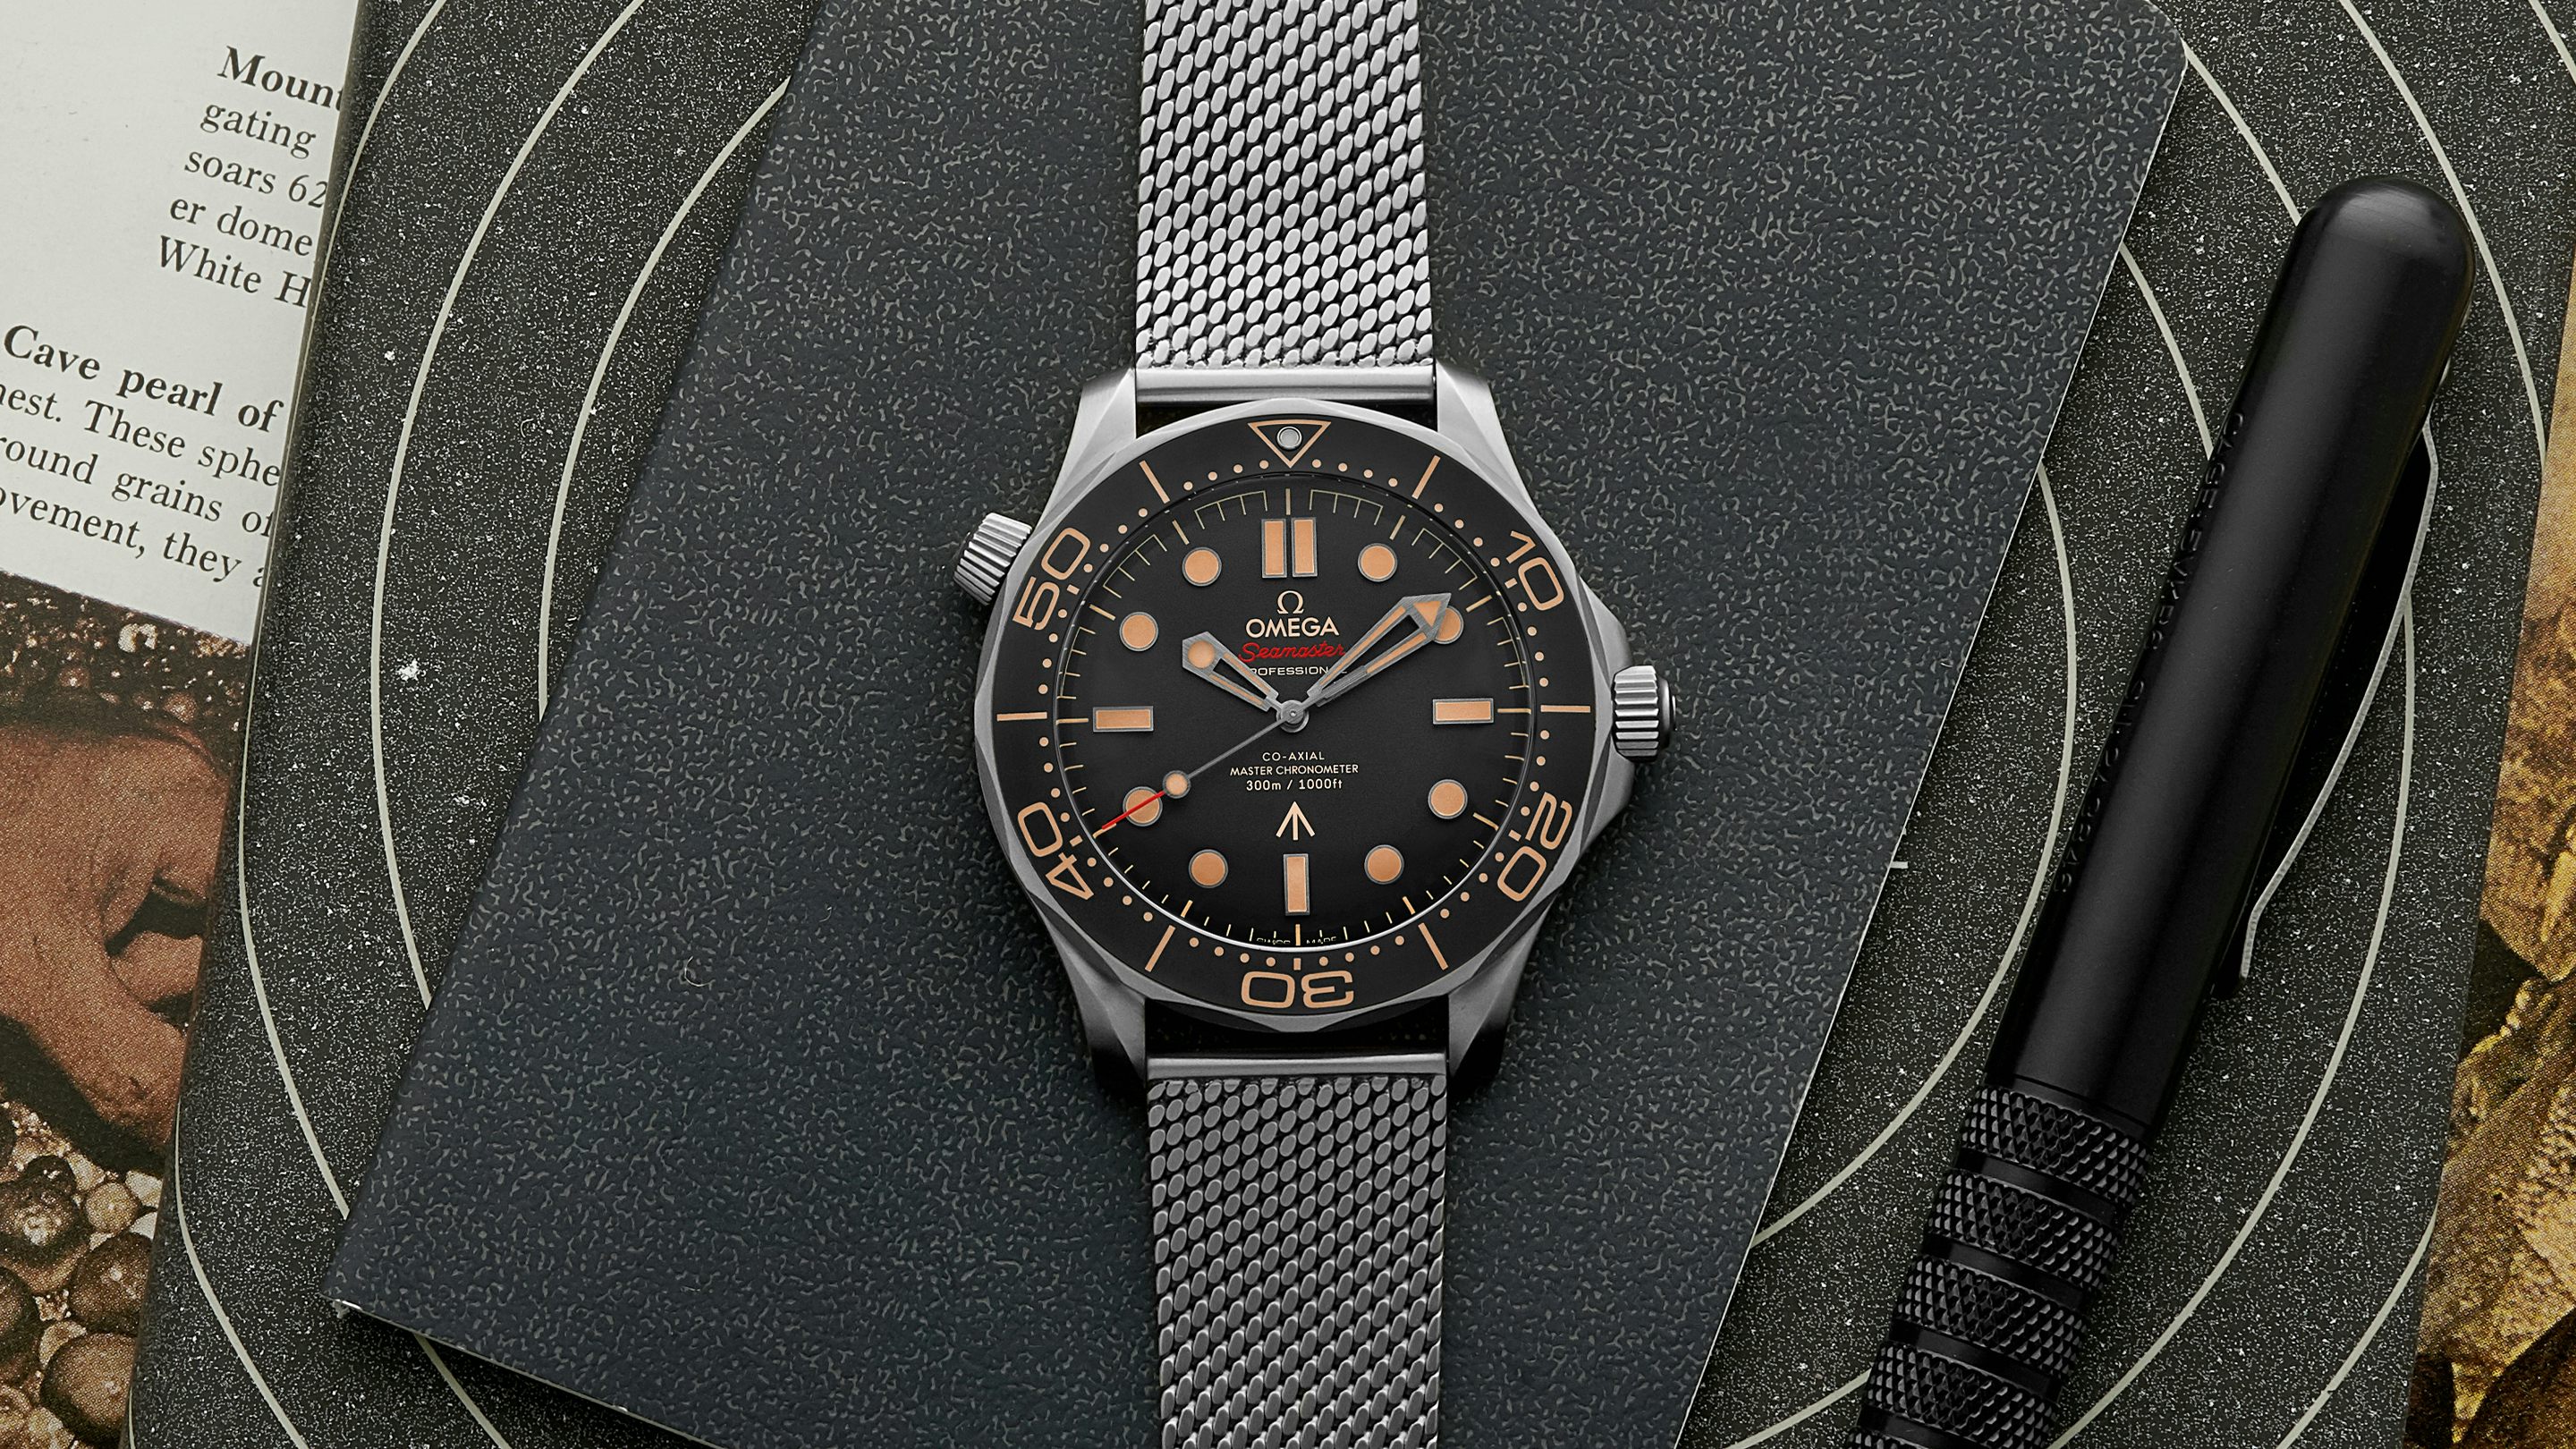 Wanted To Own James Bond's Watch? Well, Now's Your